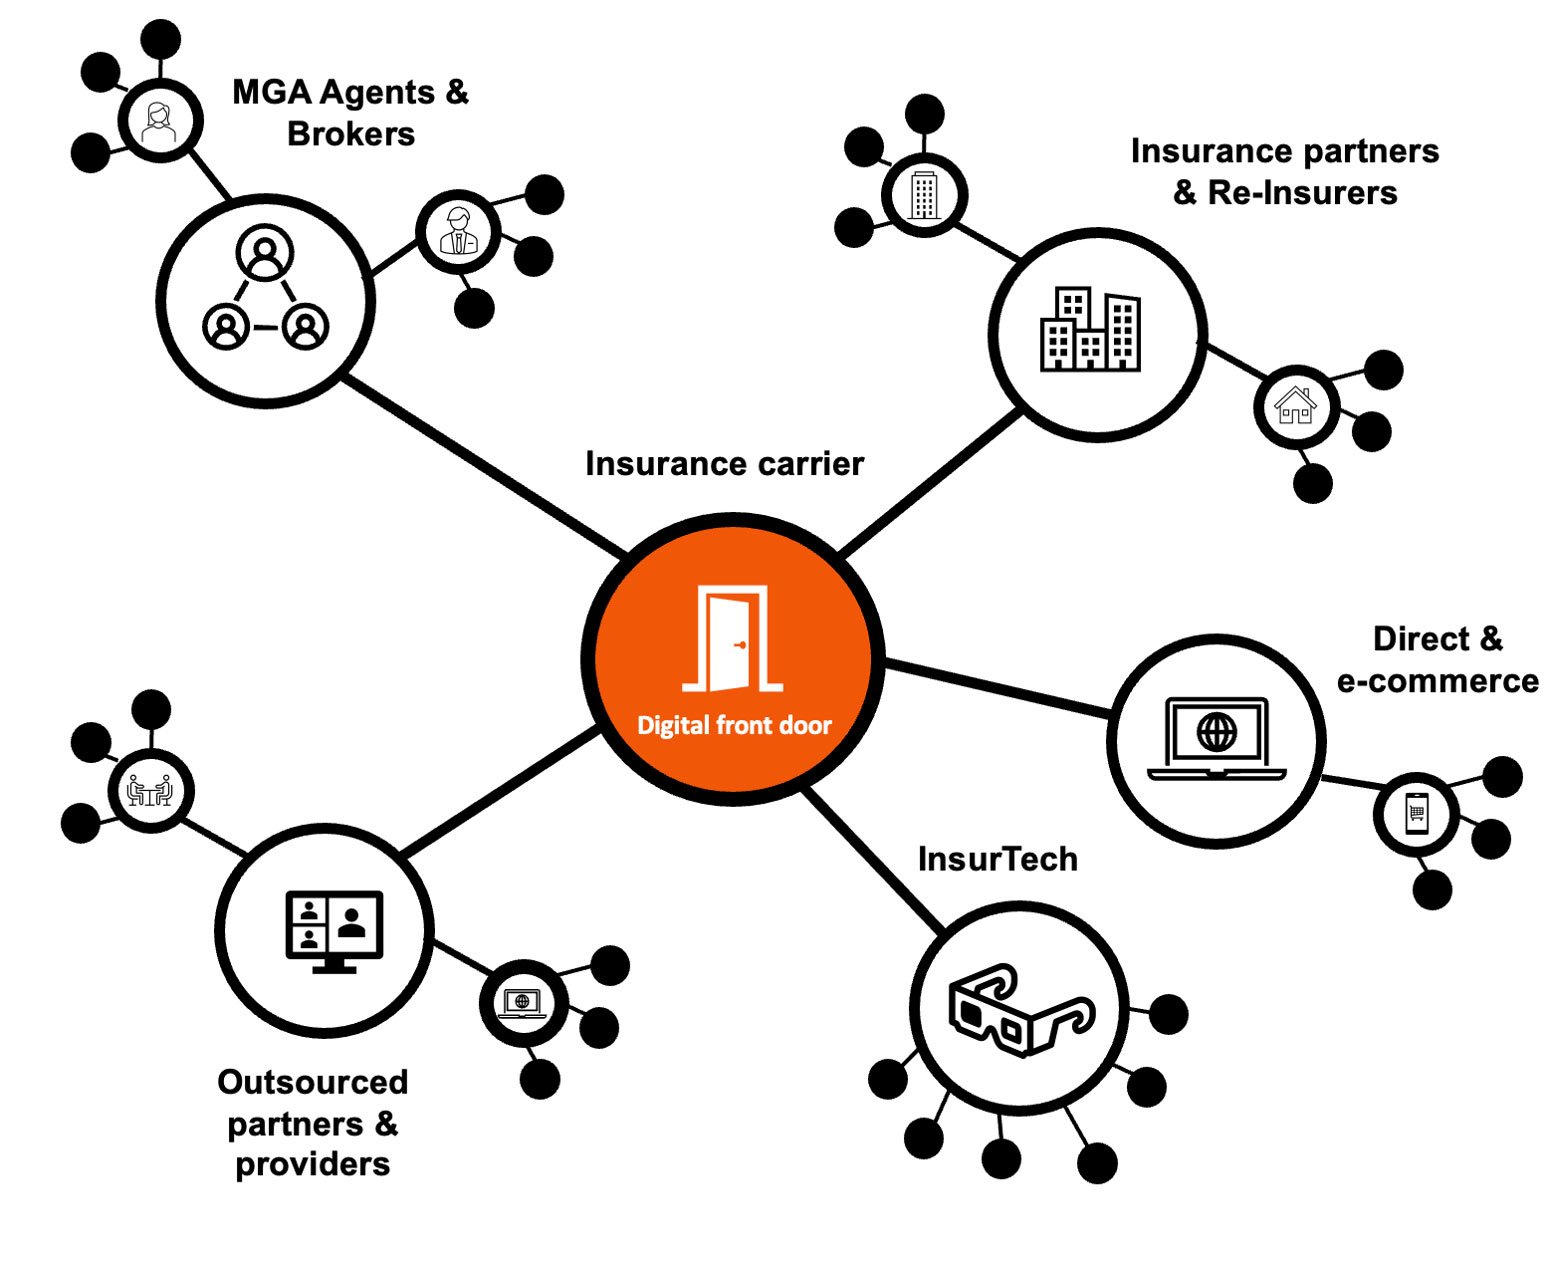 Network view of insurance ecosystem